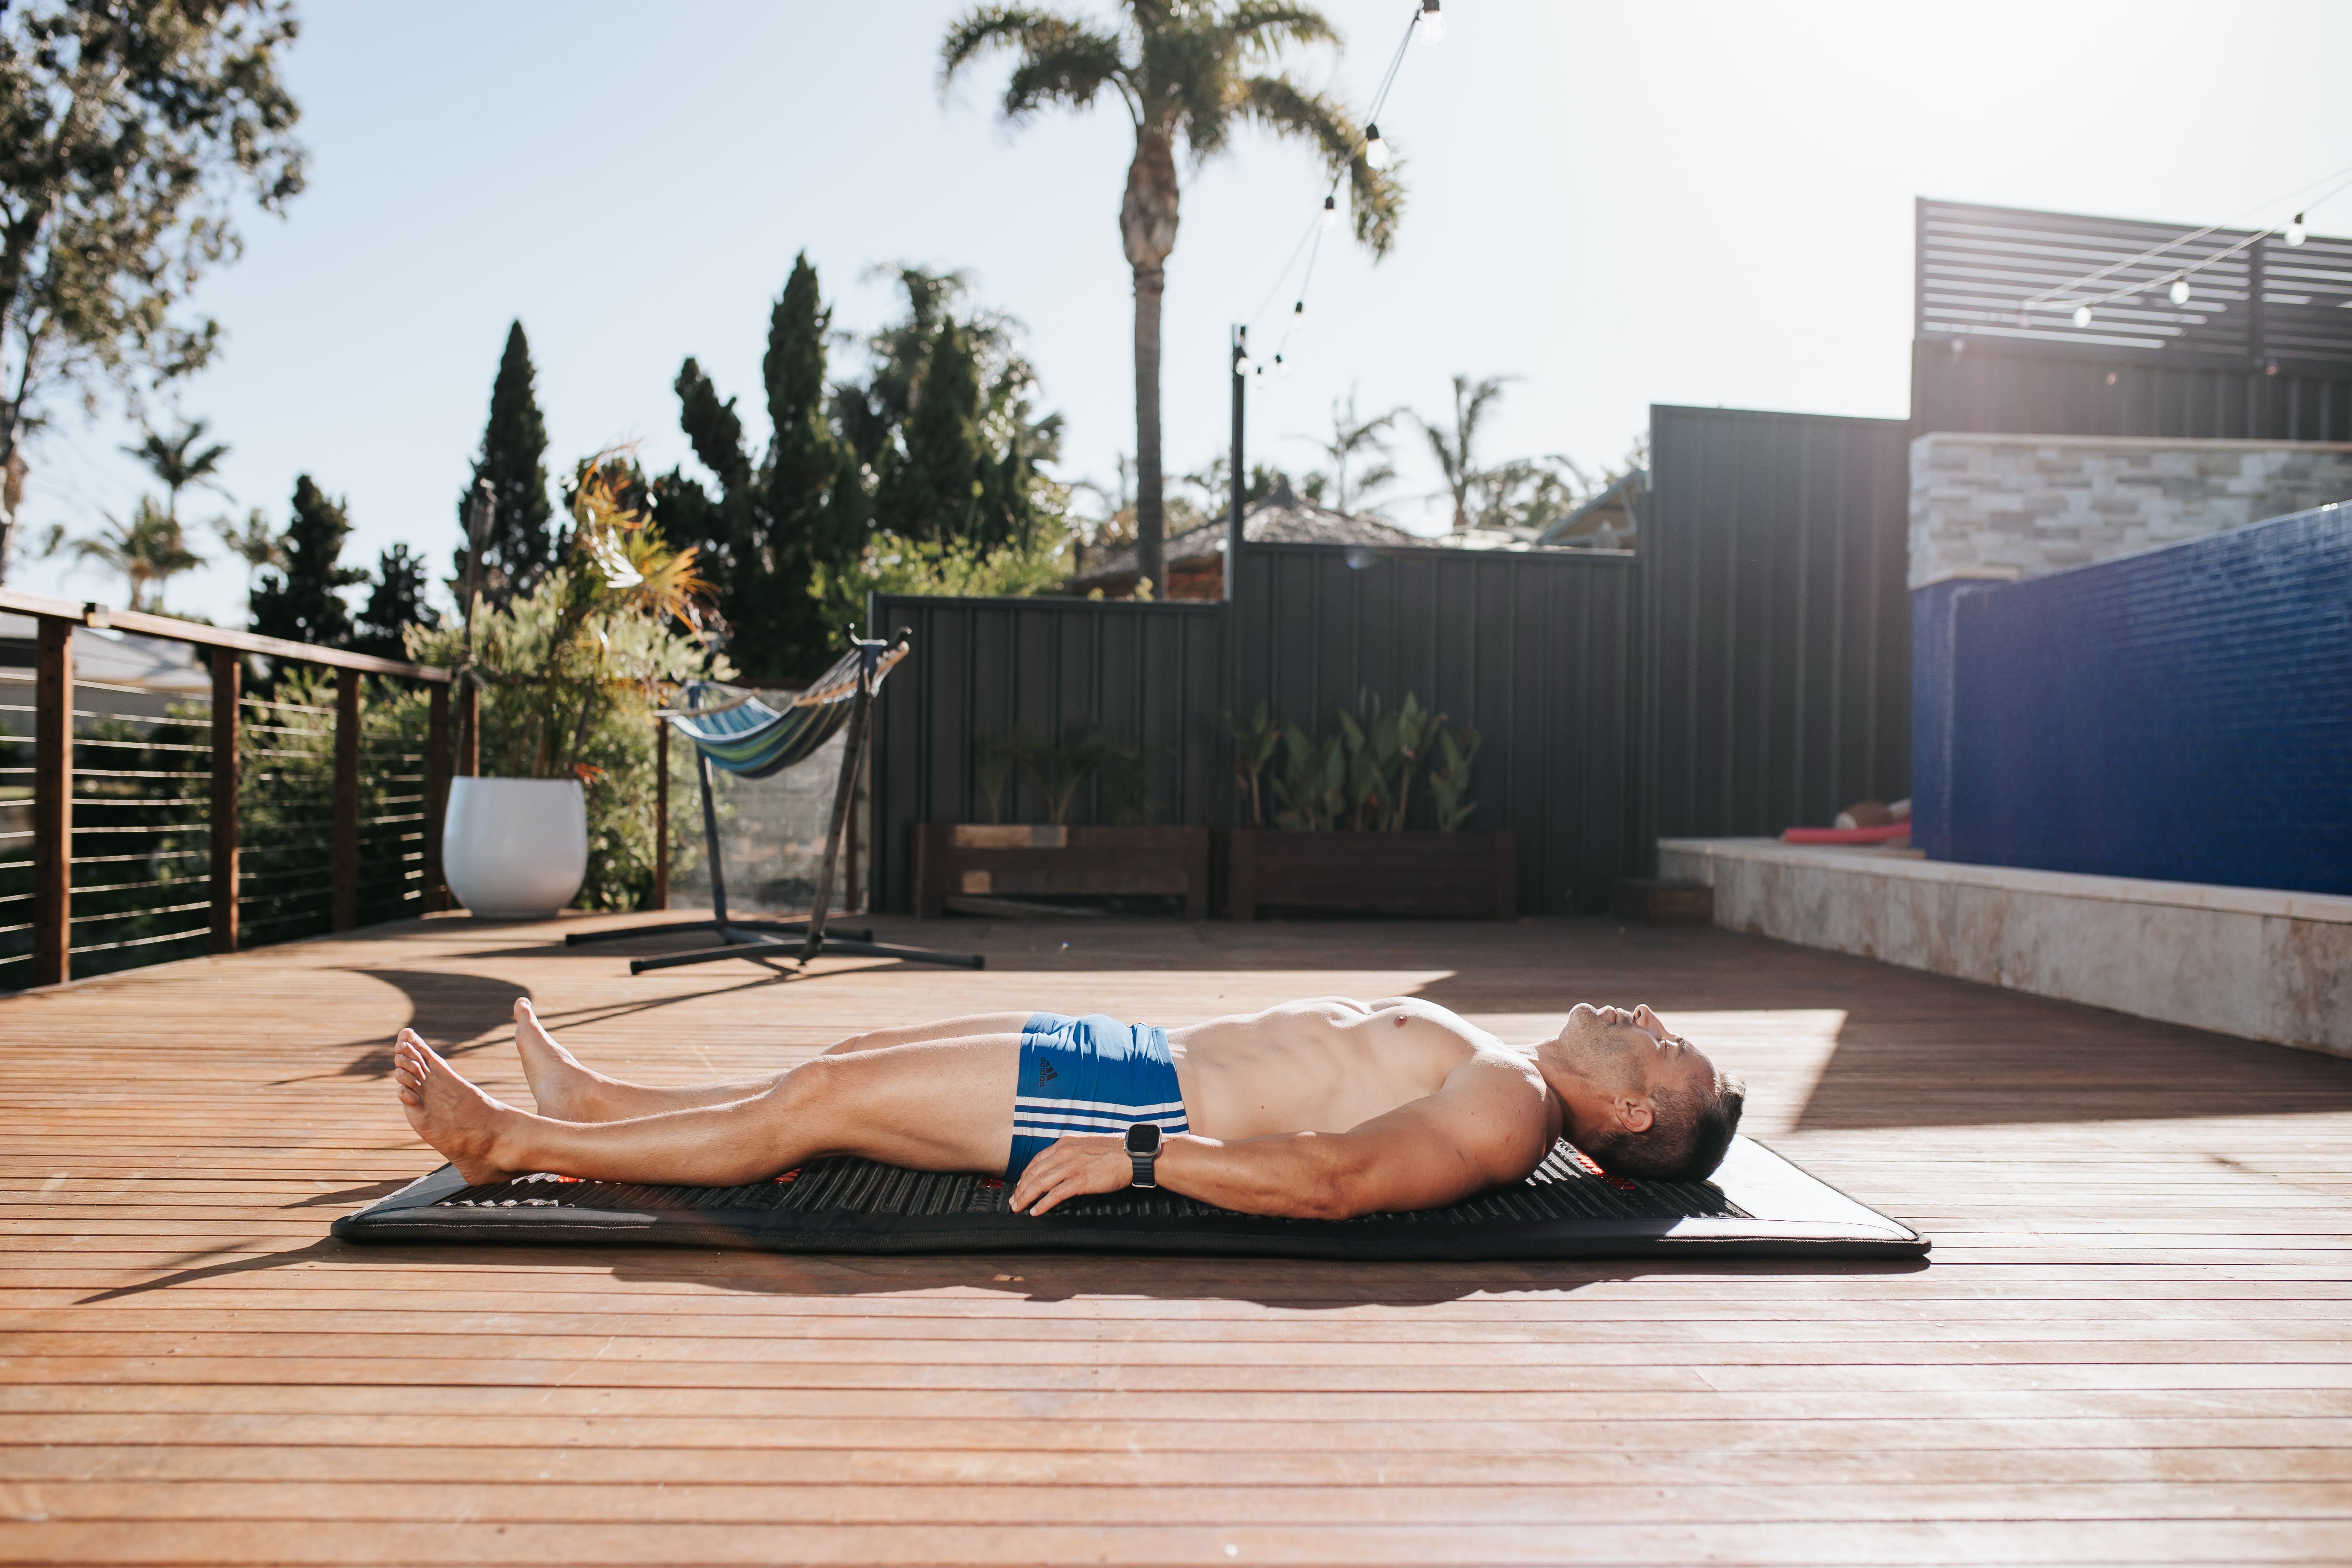 Man absorbing the sun's warmth while lying on a PeakMe PEMF mat in a tranquil backyard setting, a personal wellness retreat fostering relaxation and health.